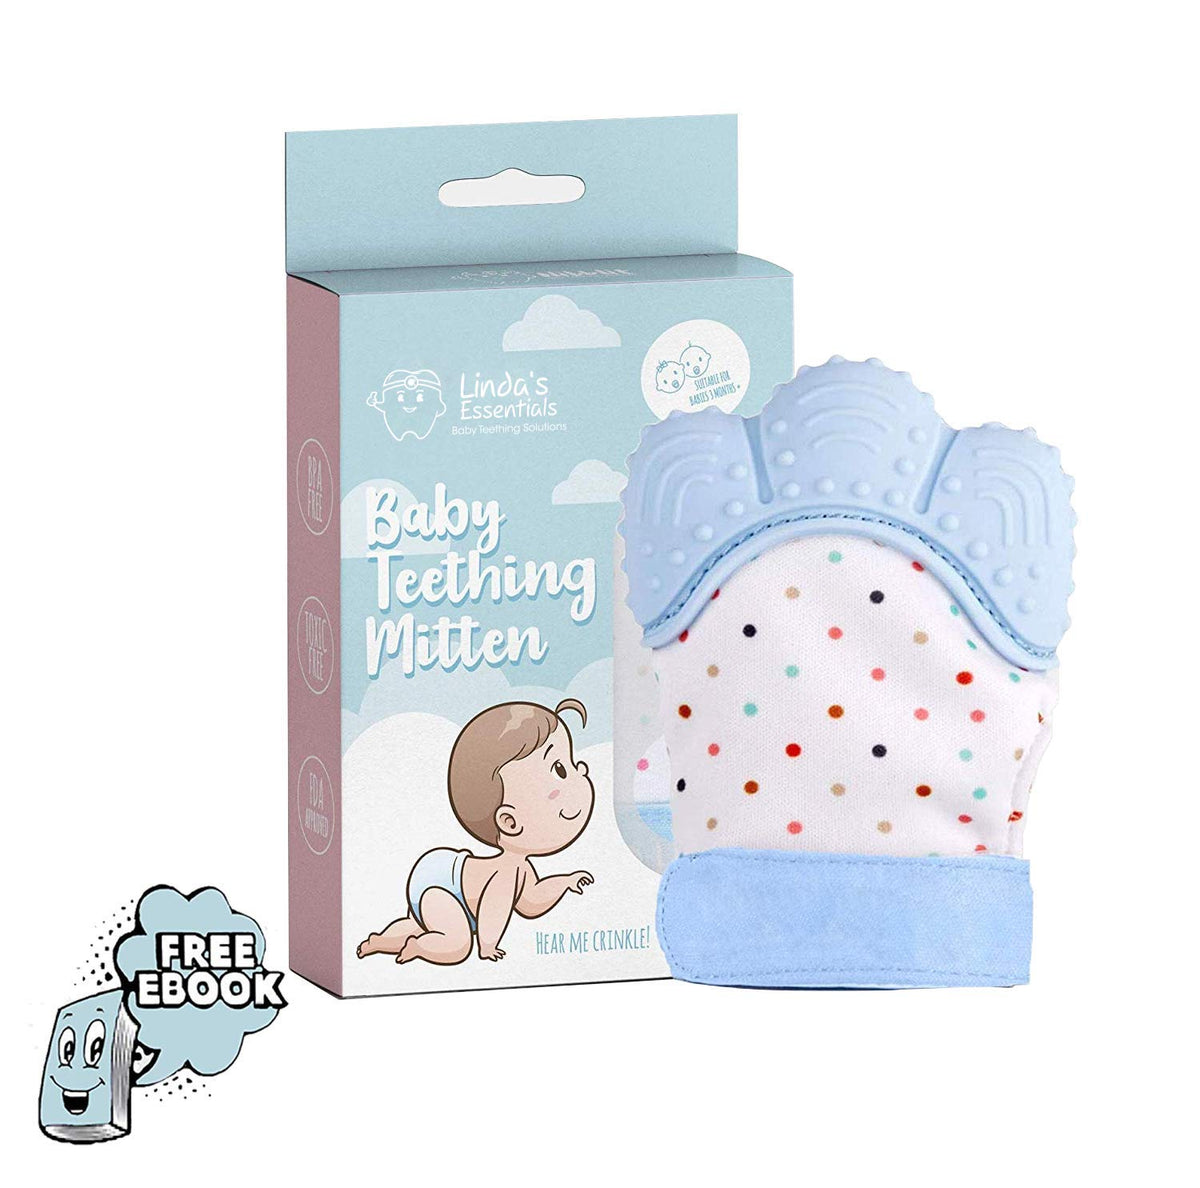 lennon products for teething